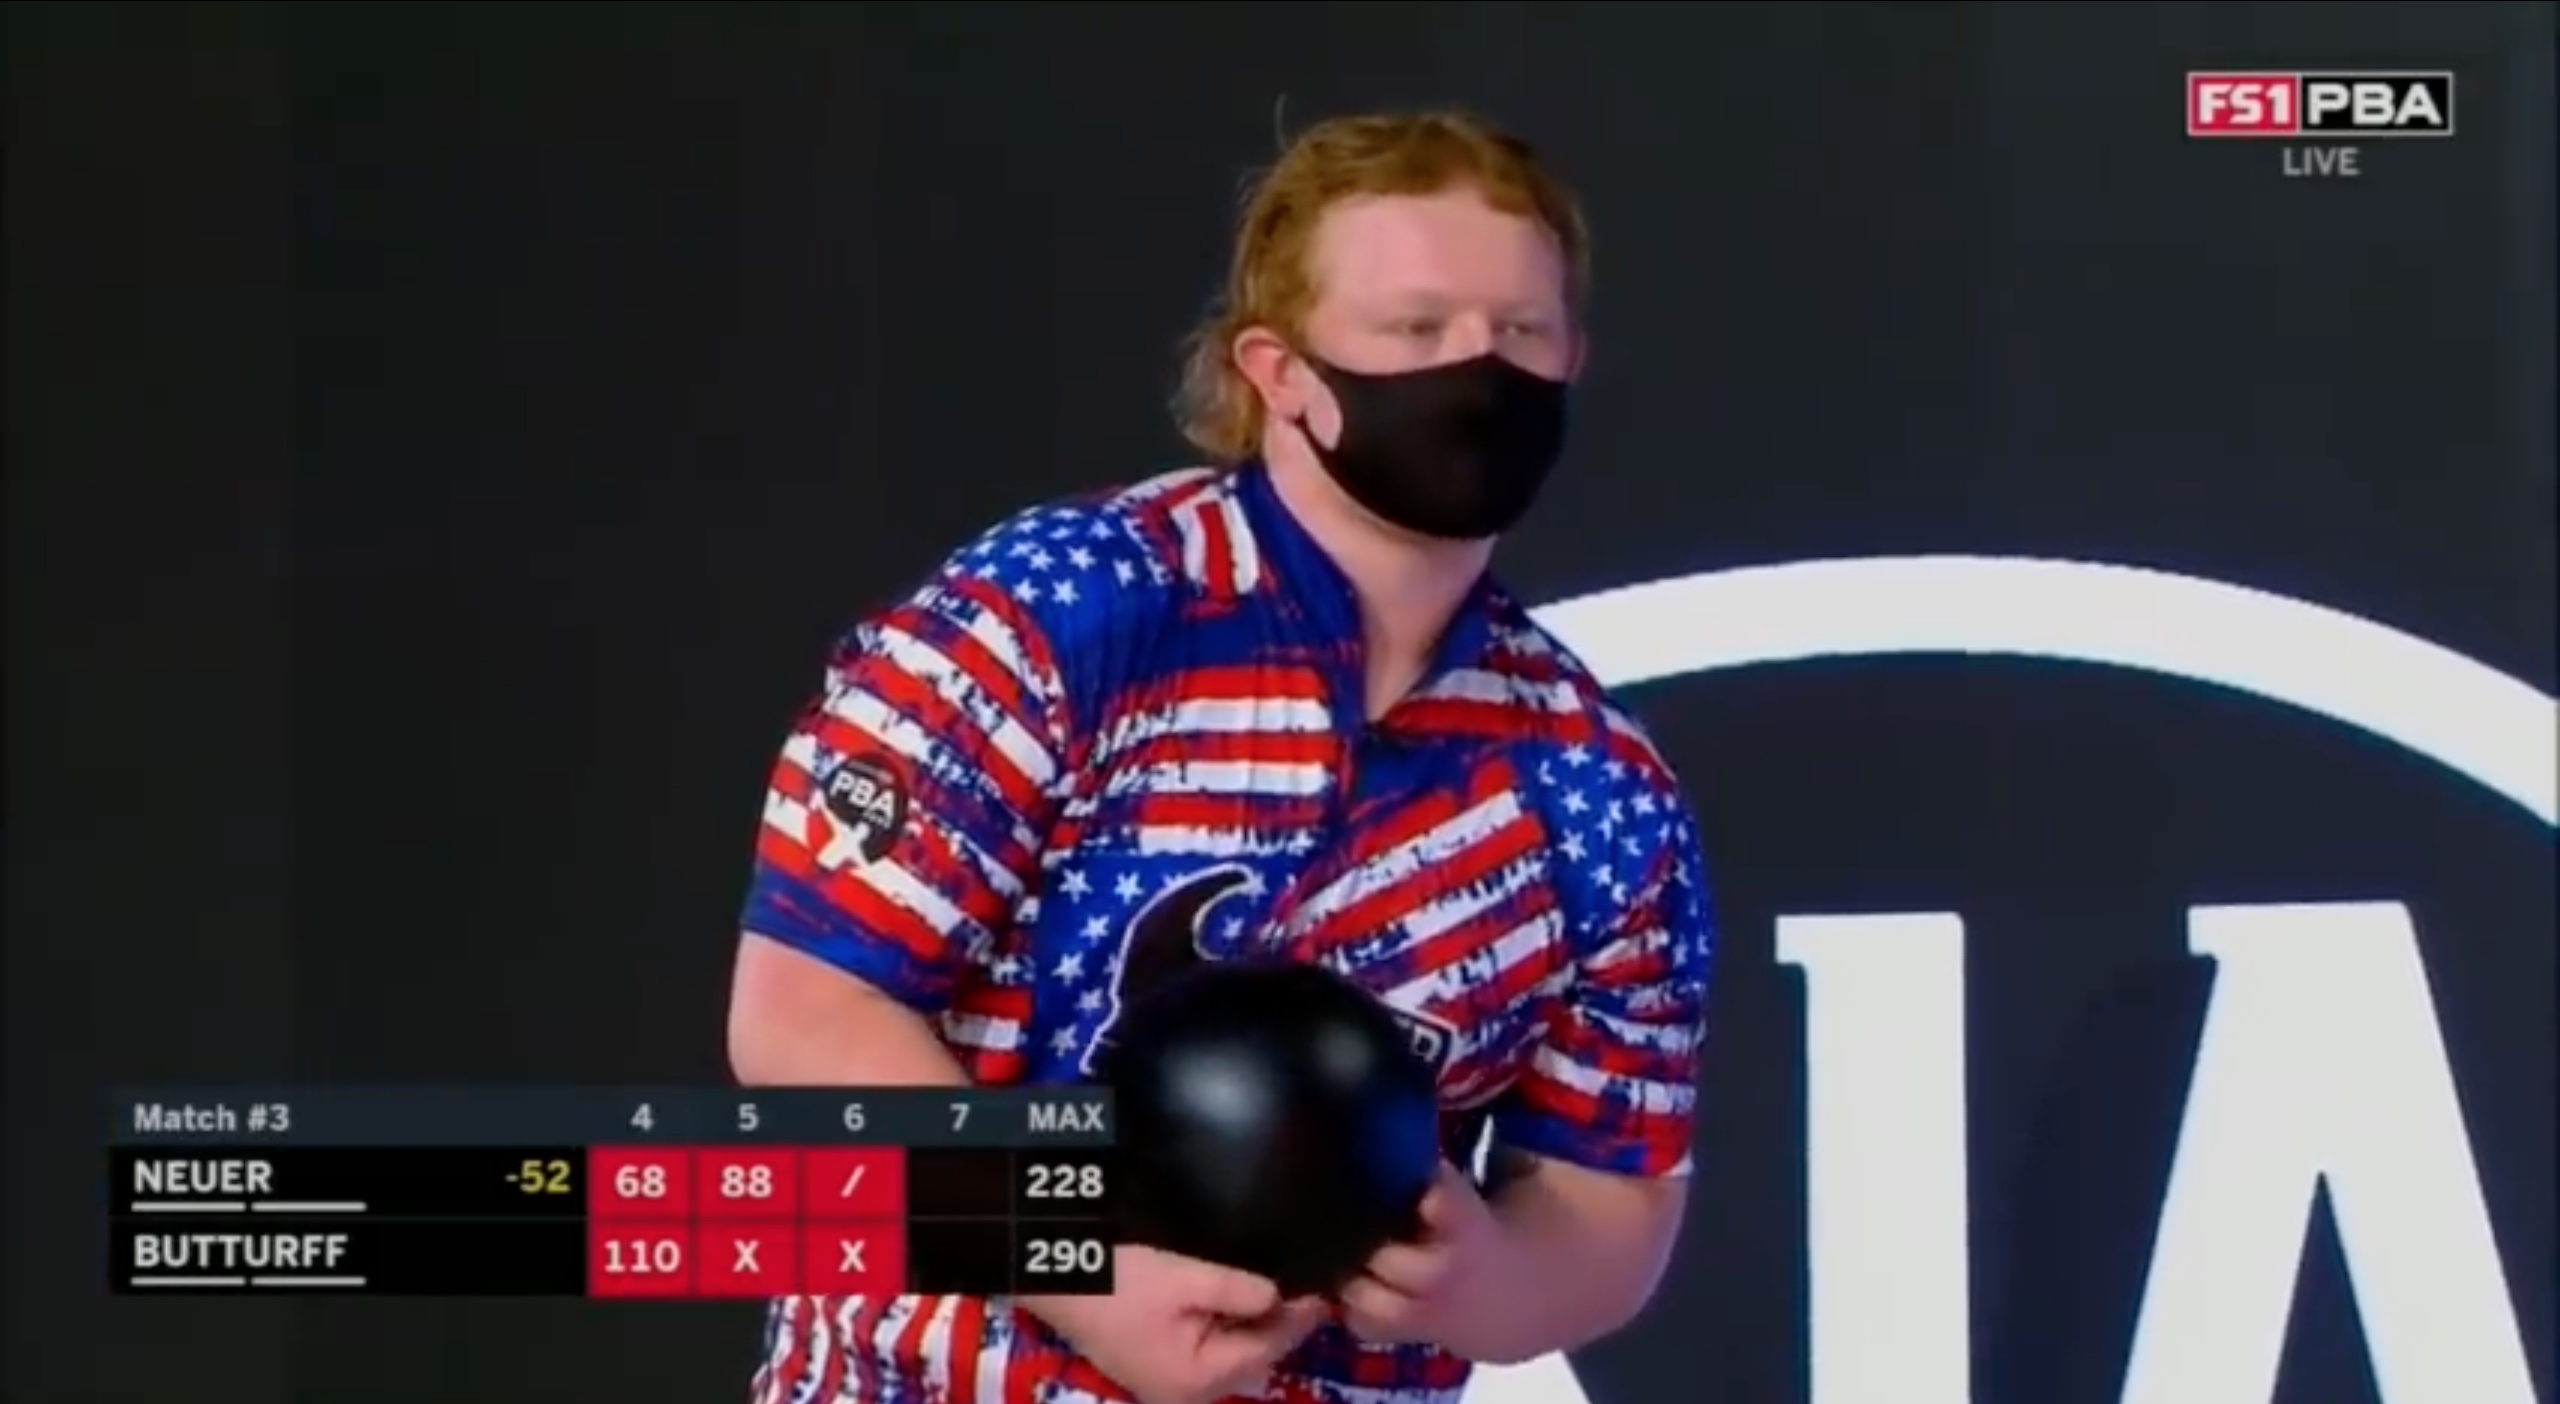 Anthony Neuer, an 18-year-old bowler, right before he hits a 7-10 split.